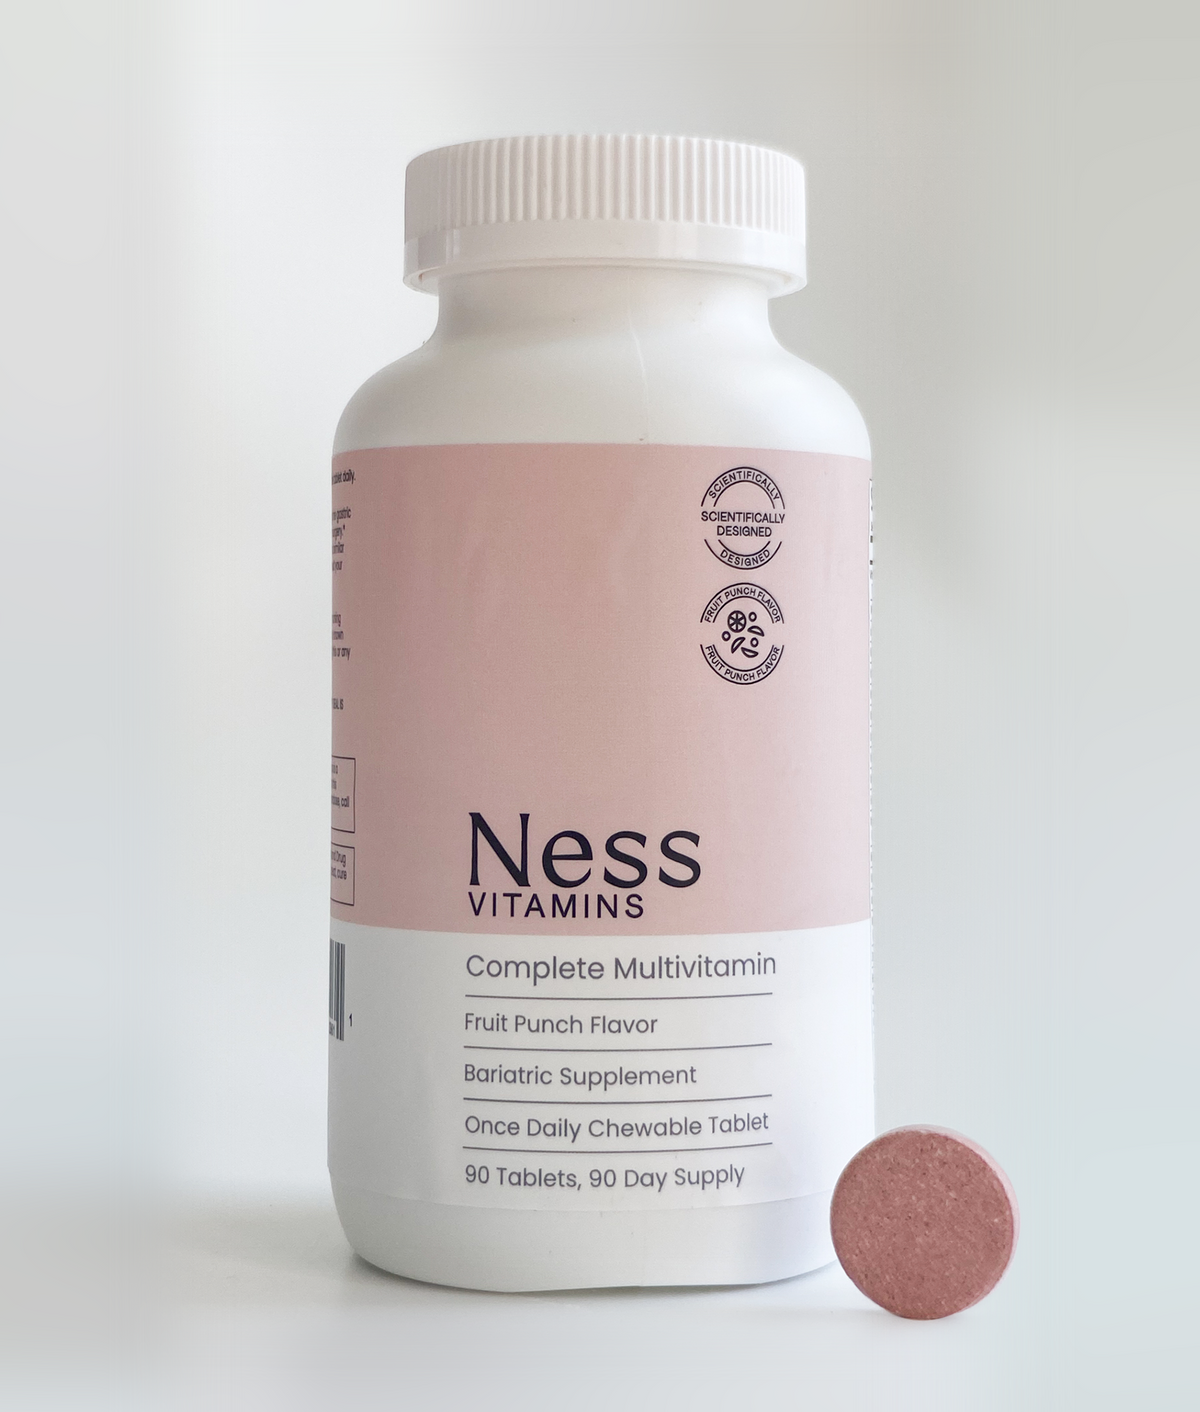 Ness Vitamins_Bariatric Multivitamin_Chewable Tablet_Fruit Punch_90 day supply